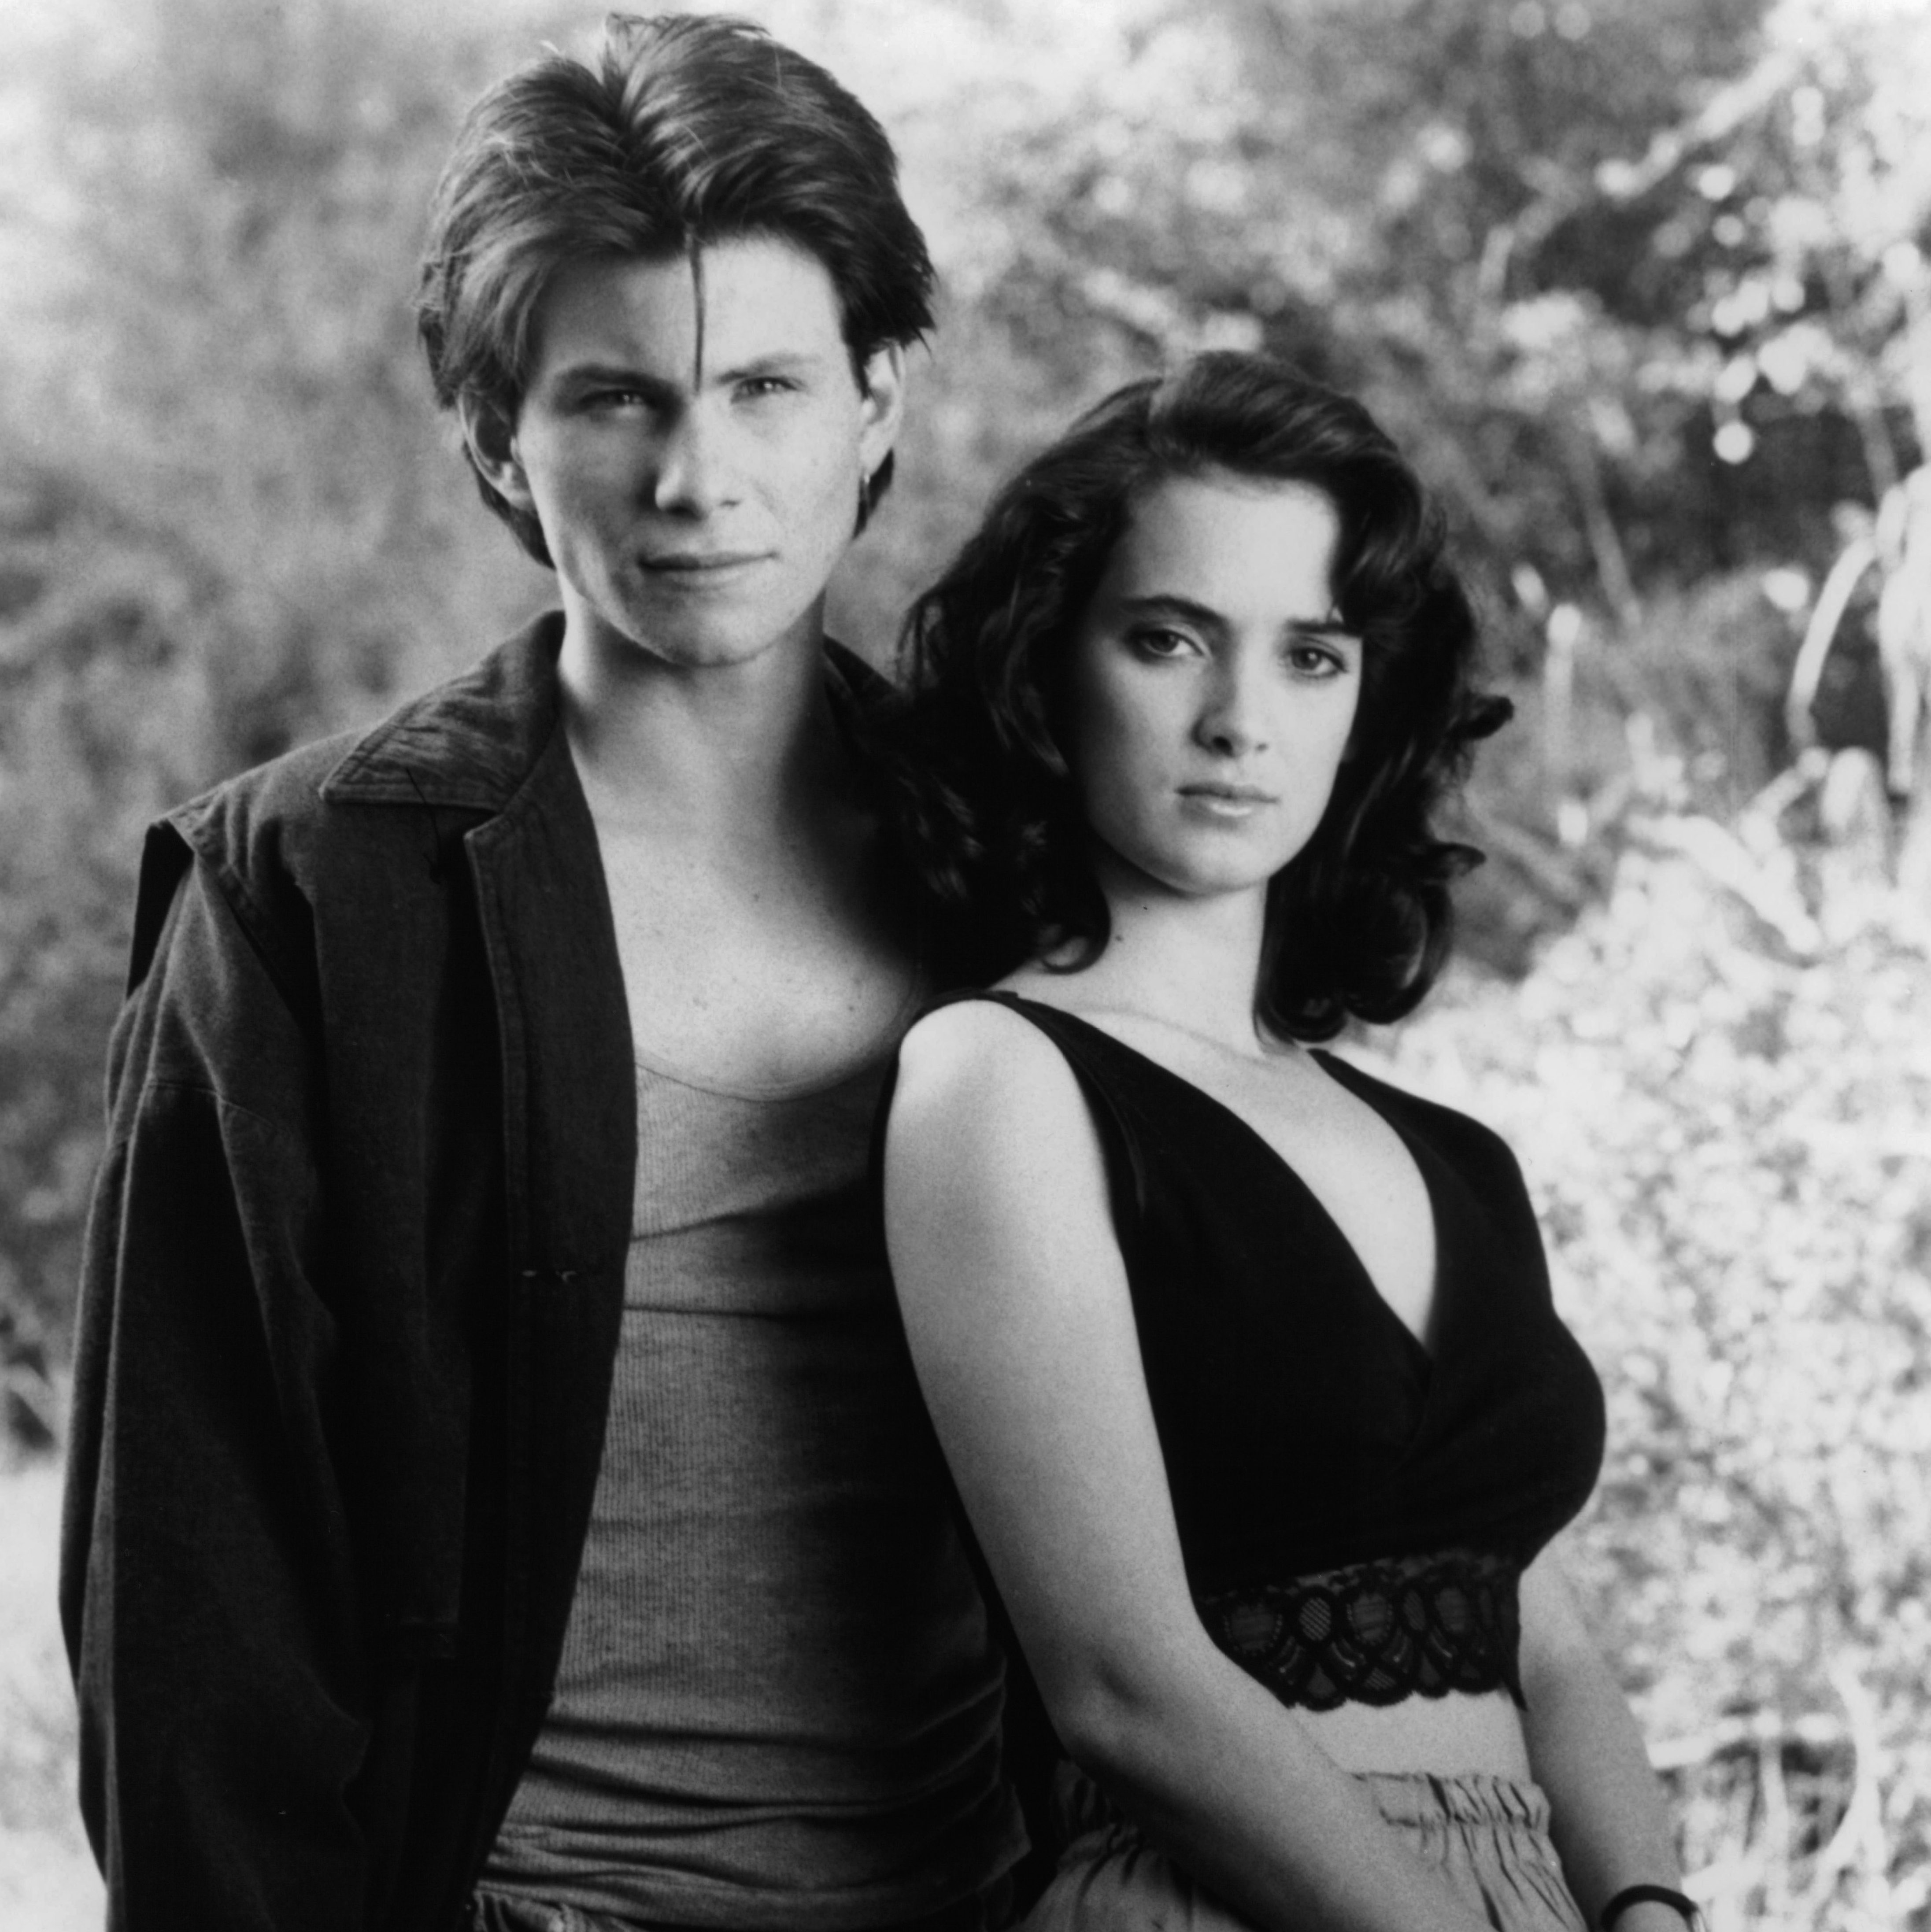 Portrait of Christian Slater and Winona Ryder for Heathers, 1988